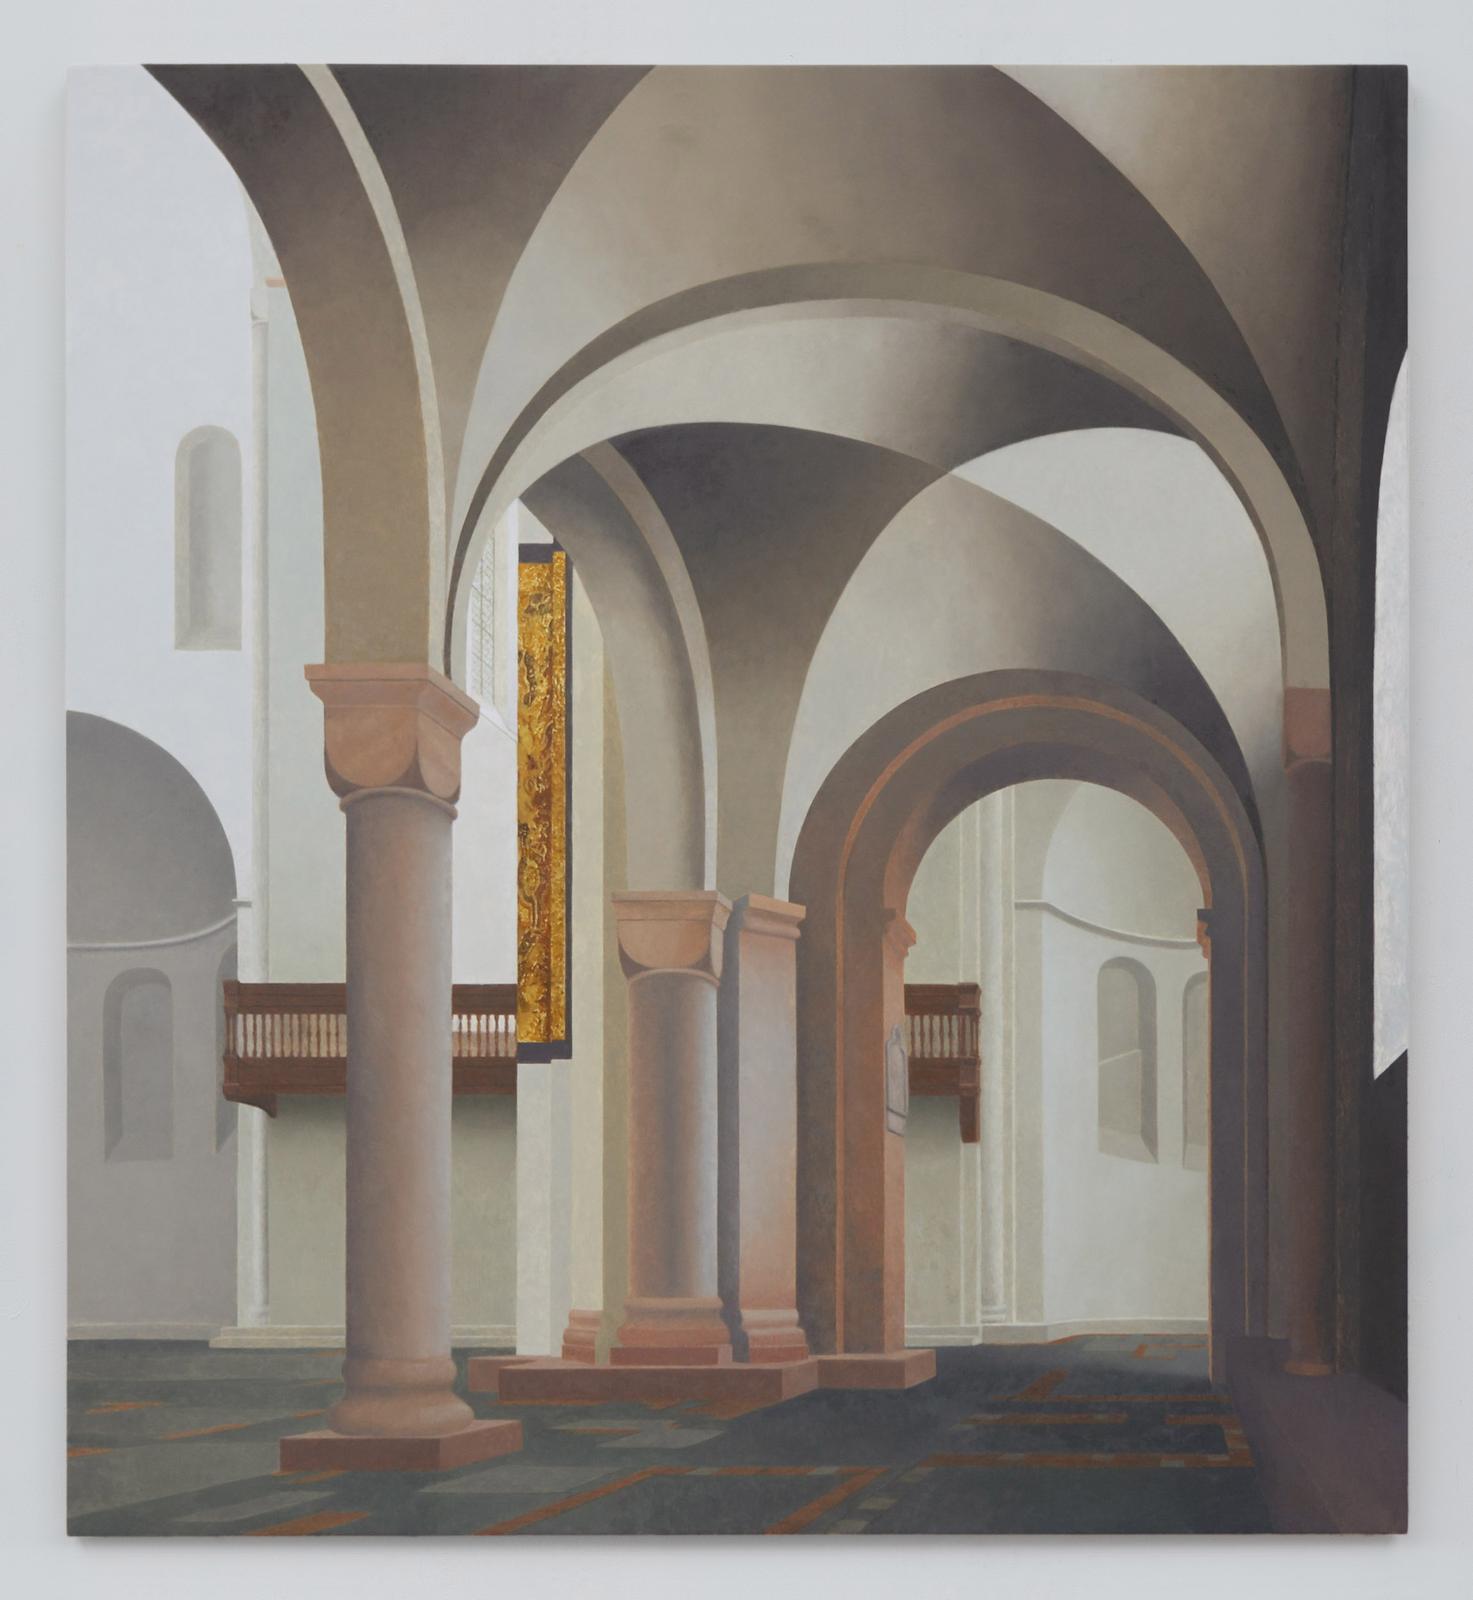 Paul Winstanley, Faith (After Saenredam), 2016, oil and gold leaf on gesso on panel, 72 x 66 cm / 28.3 x 26 in | Paul Winstanley: Faith After Saenredam and Other Paintings | Saturday 20 May – Saturday 1 July 2017 | Kerlin Gallery